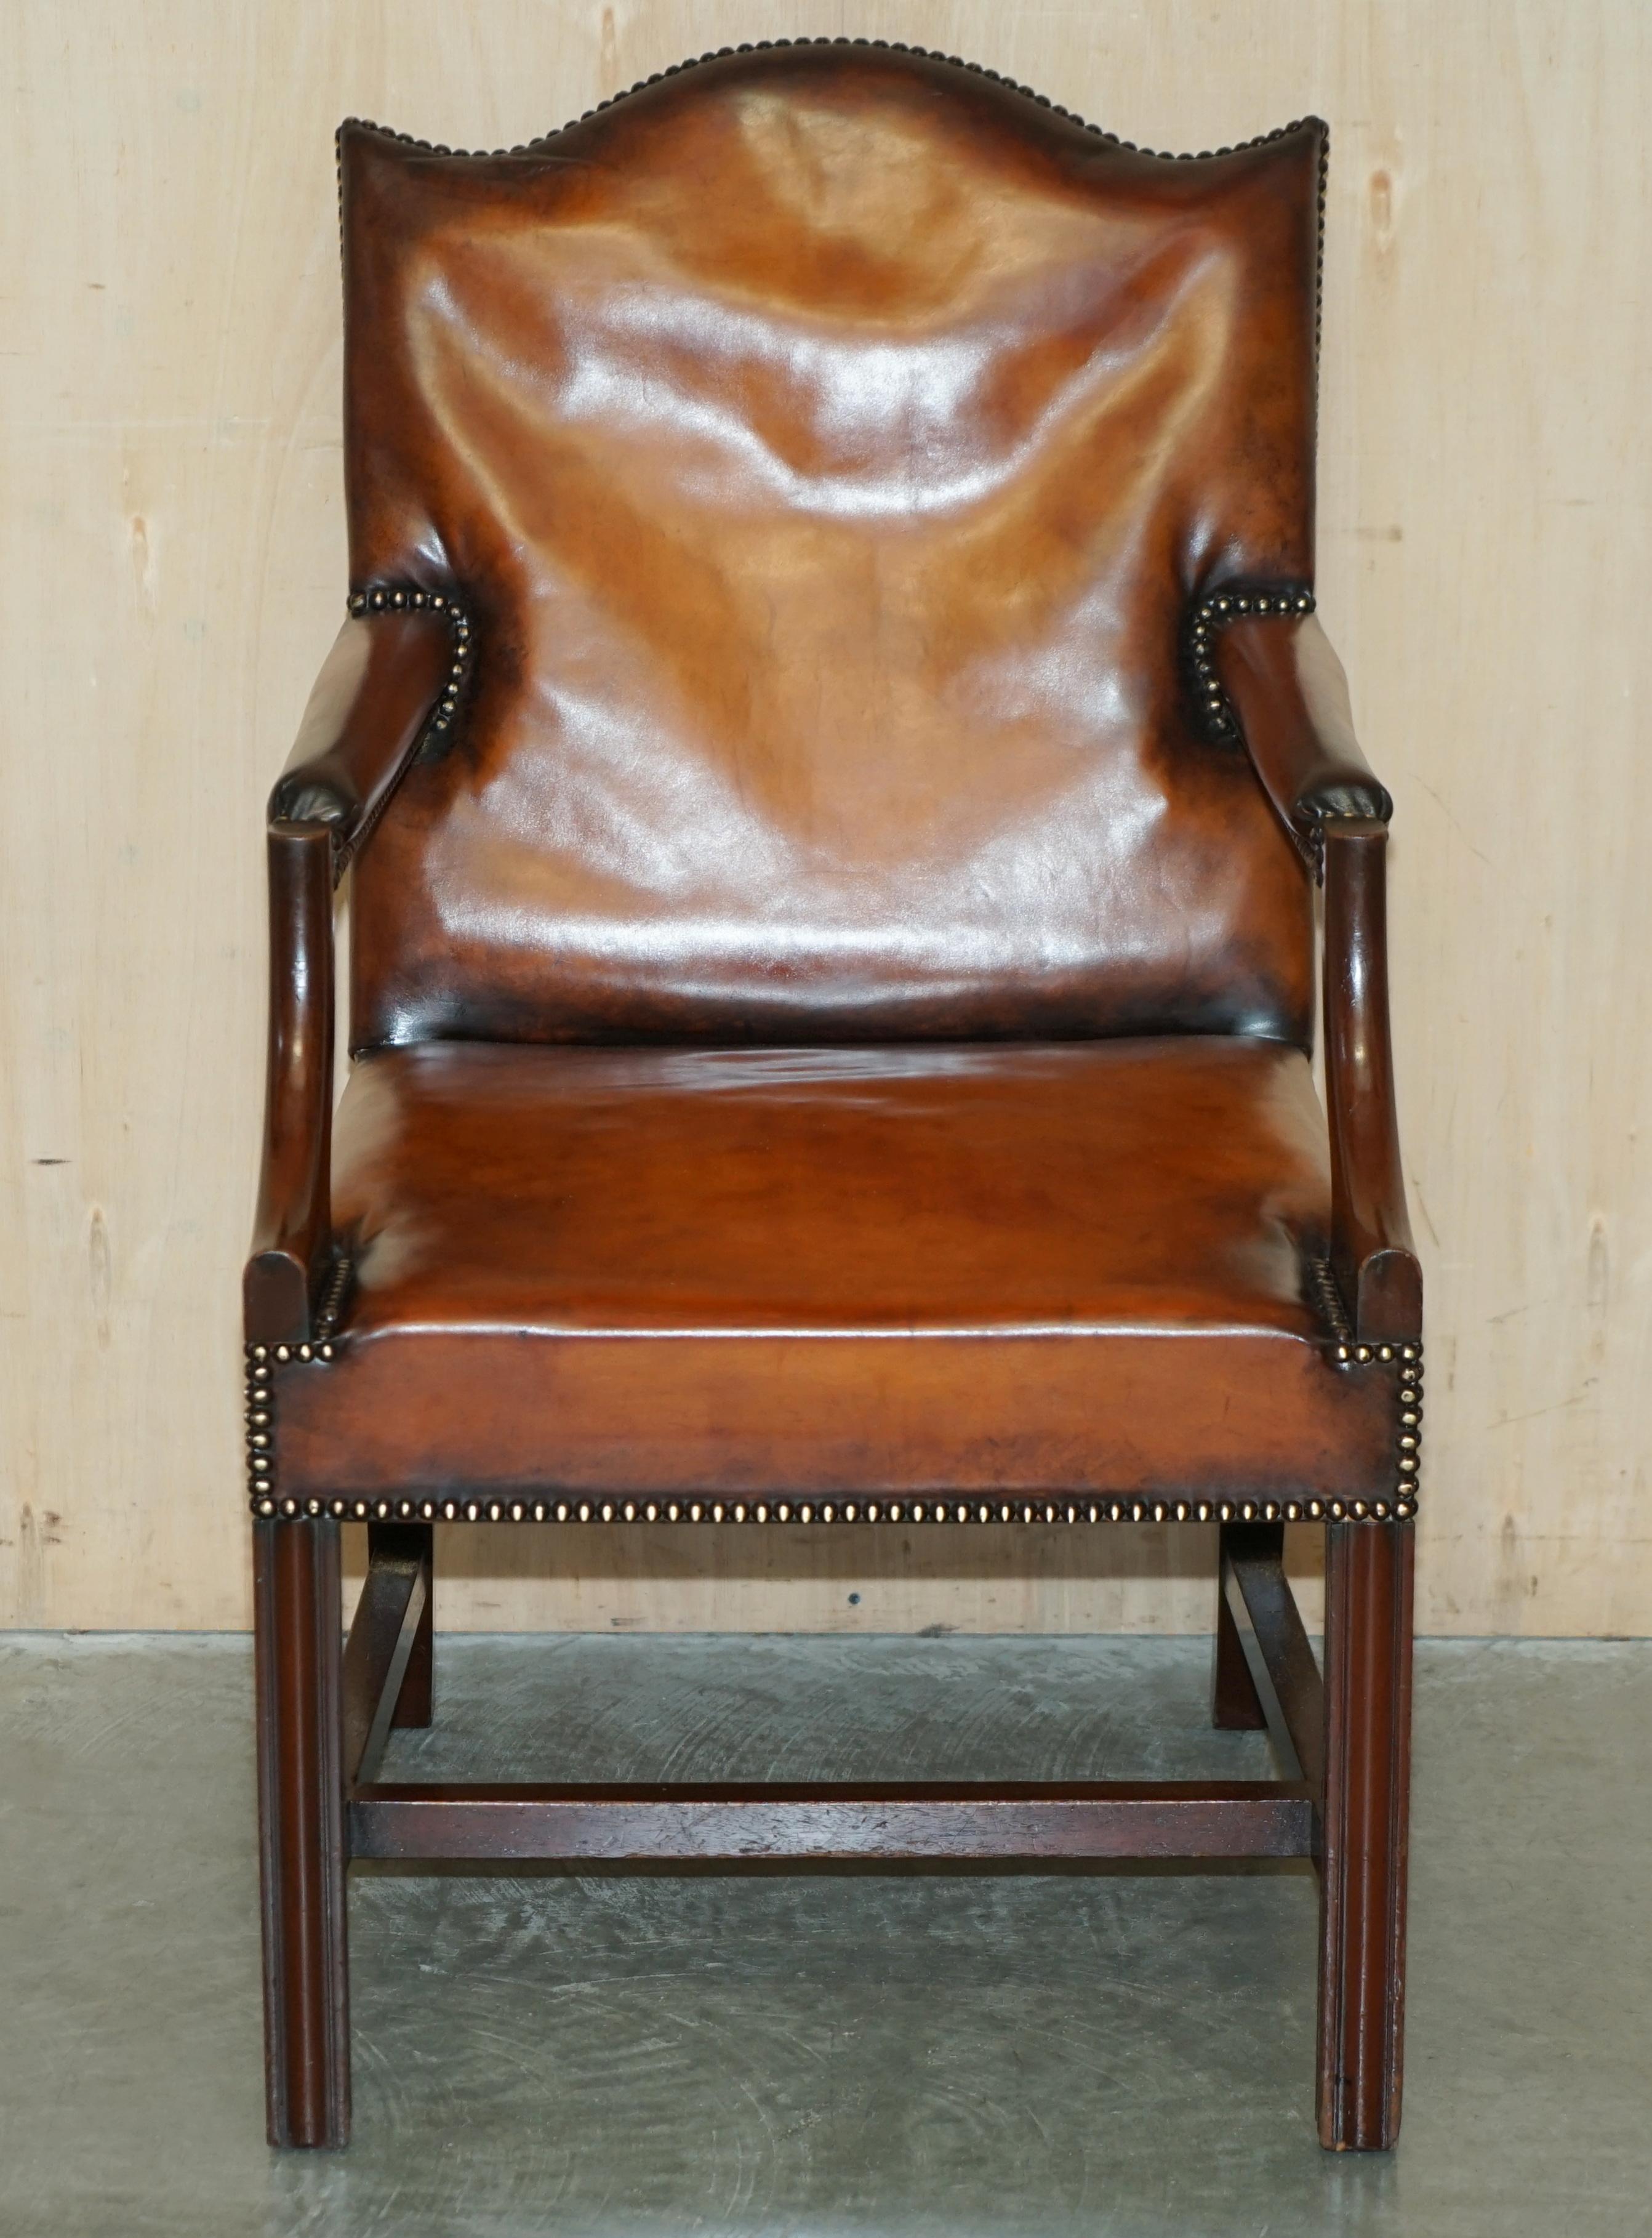 Royal House Antiques

Royal House Antiques is delighted to offer for sale this lovely hand made in England circa 1950's fully restored Whisky brown leather Gainsborough carver desk armchair 

Please note the delivery fee listed is just a guide, it